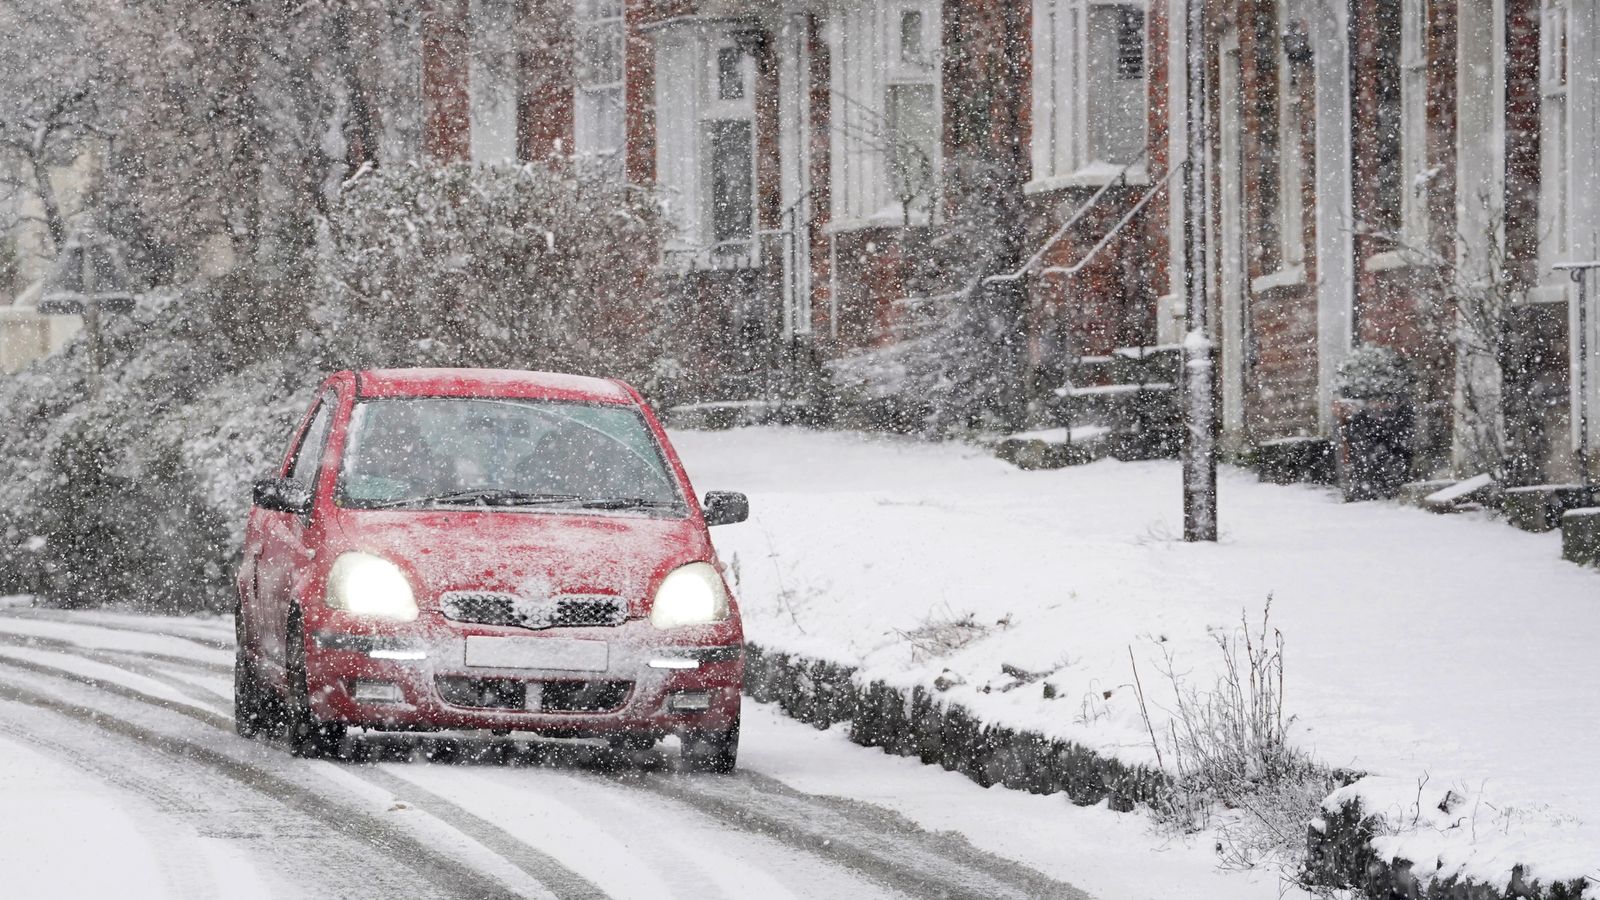 'severe' alert on the roads as freezing temperatures and snow hit uk